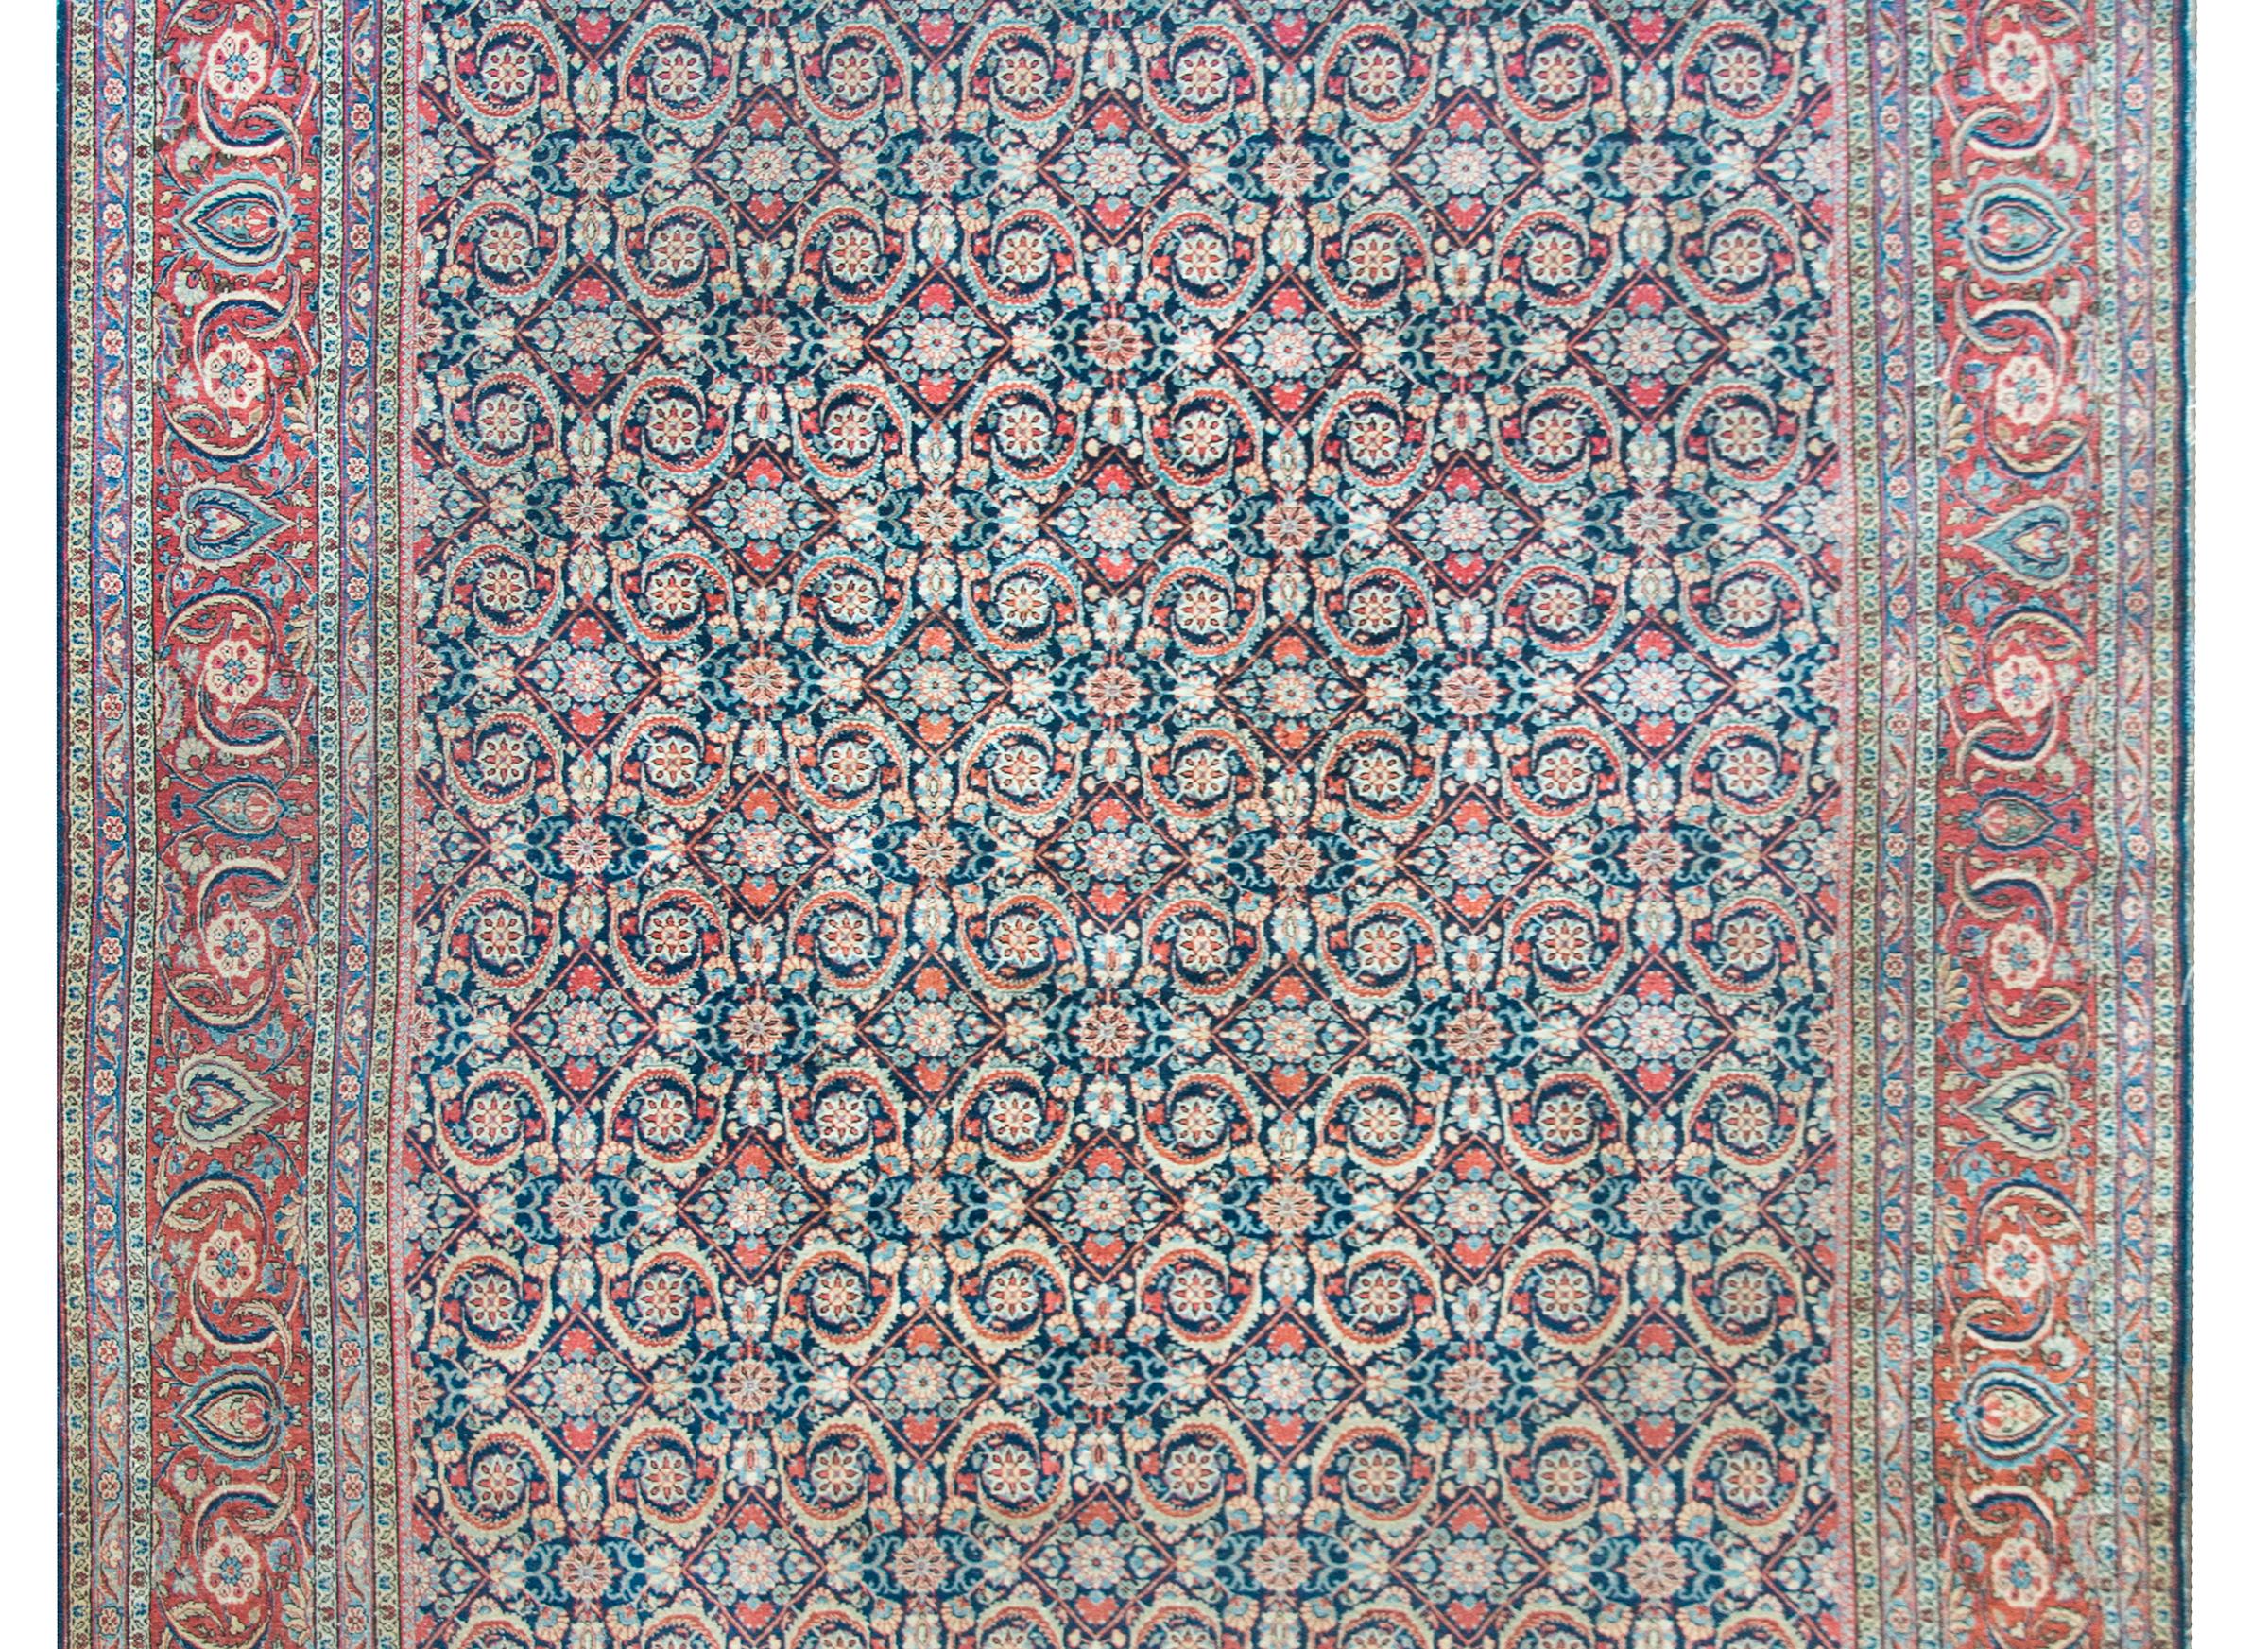 A fantastic early 20th century Persian Kashan rug with an all-over trellis floral pattern with myriad flowers, leaves, and vines, and all woven in crimson, cream, light and dark indigo, and surrounded by a wide floral partnered border with a central